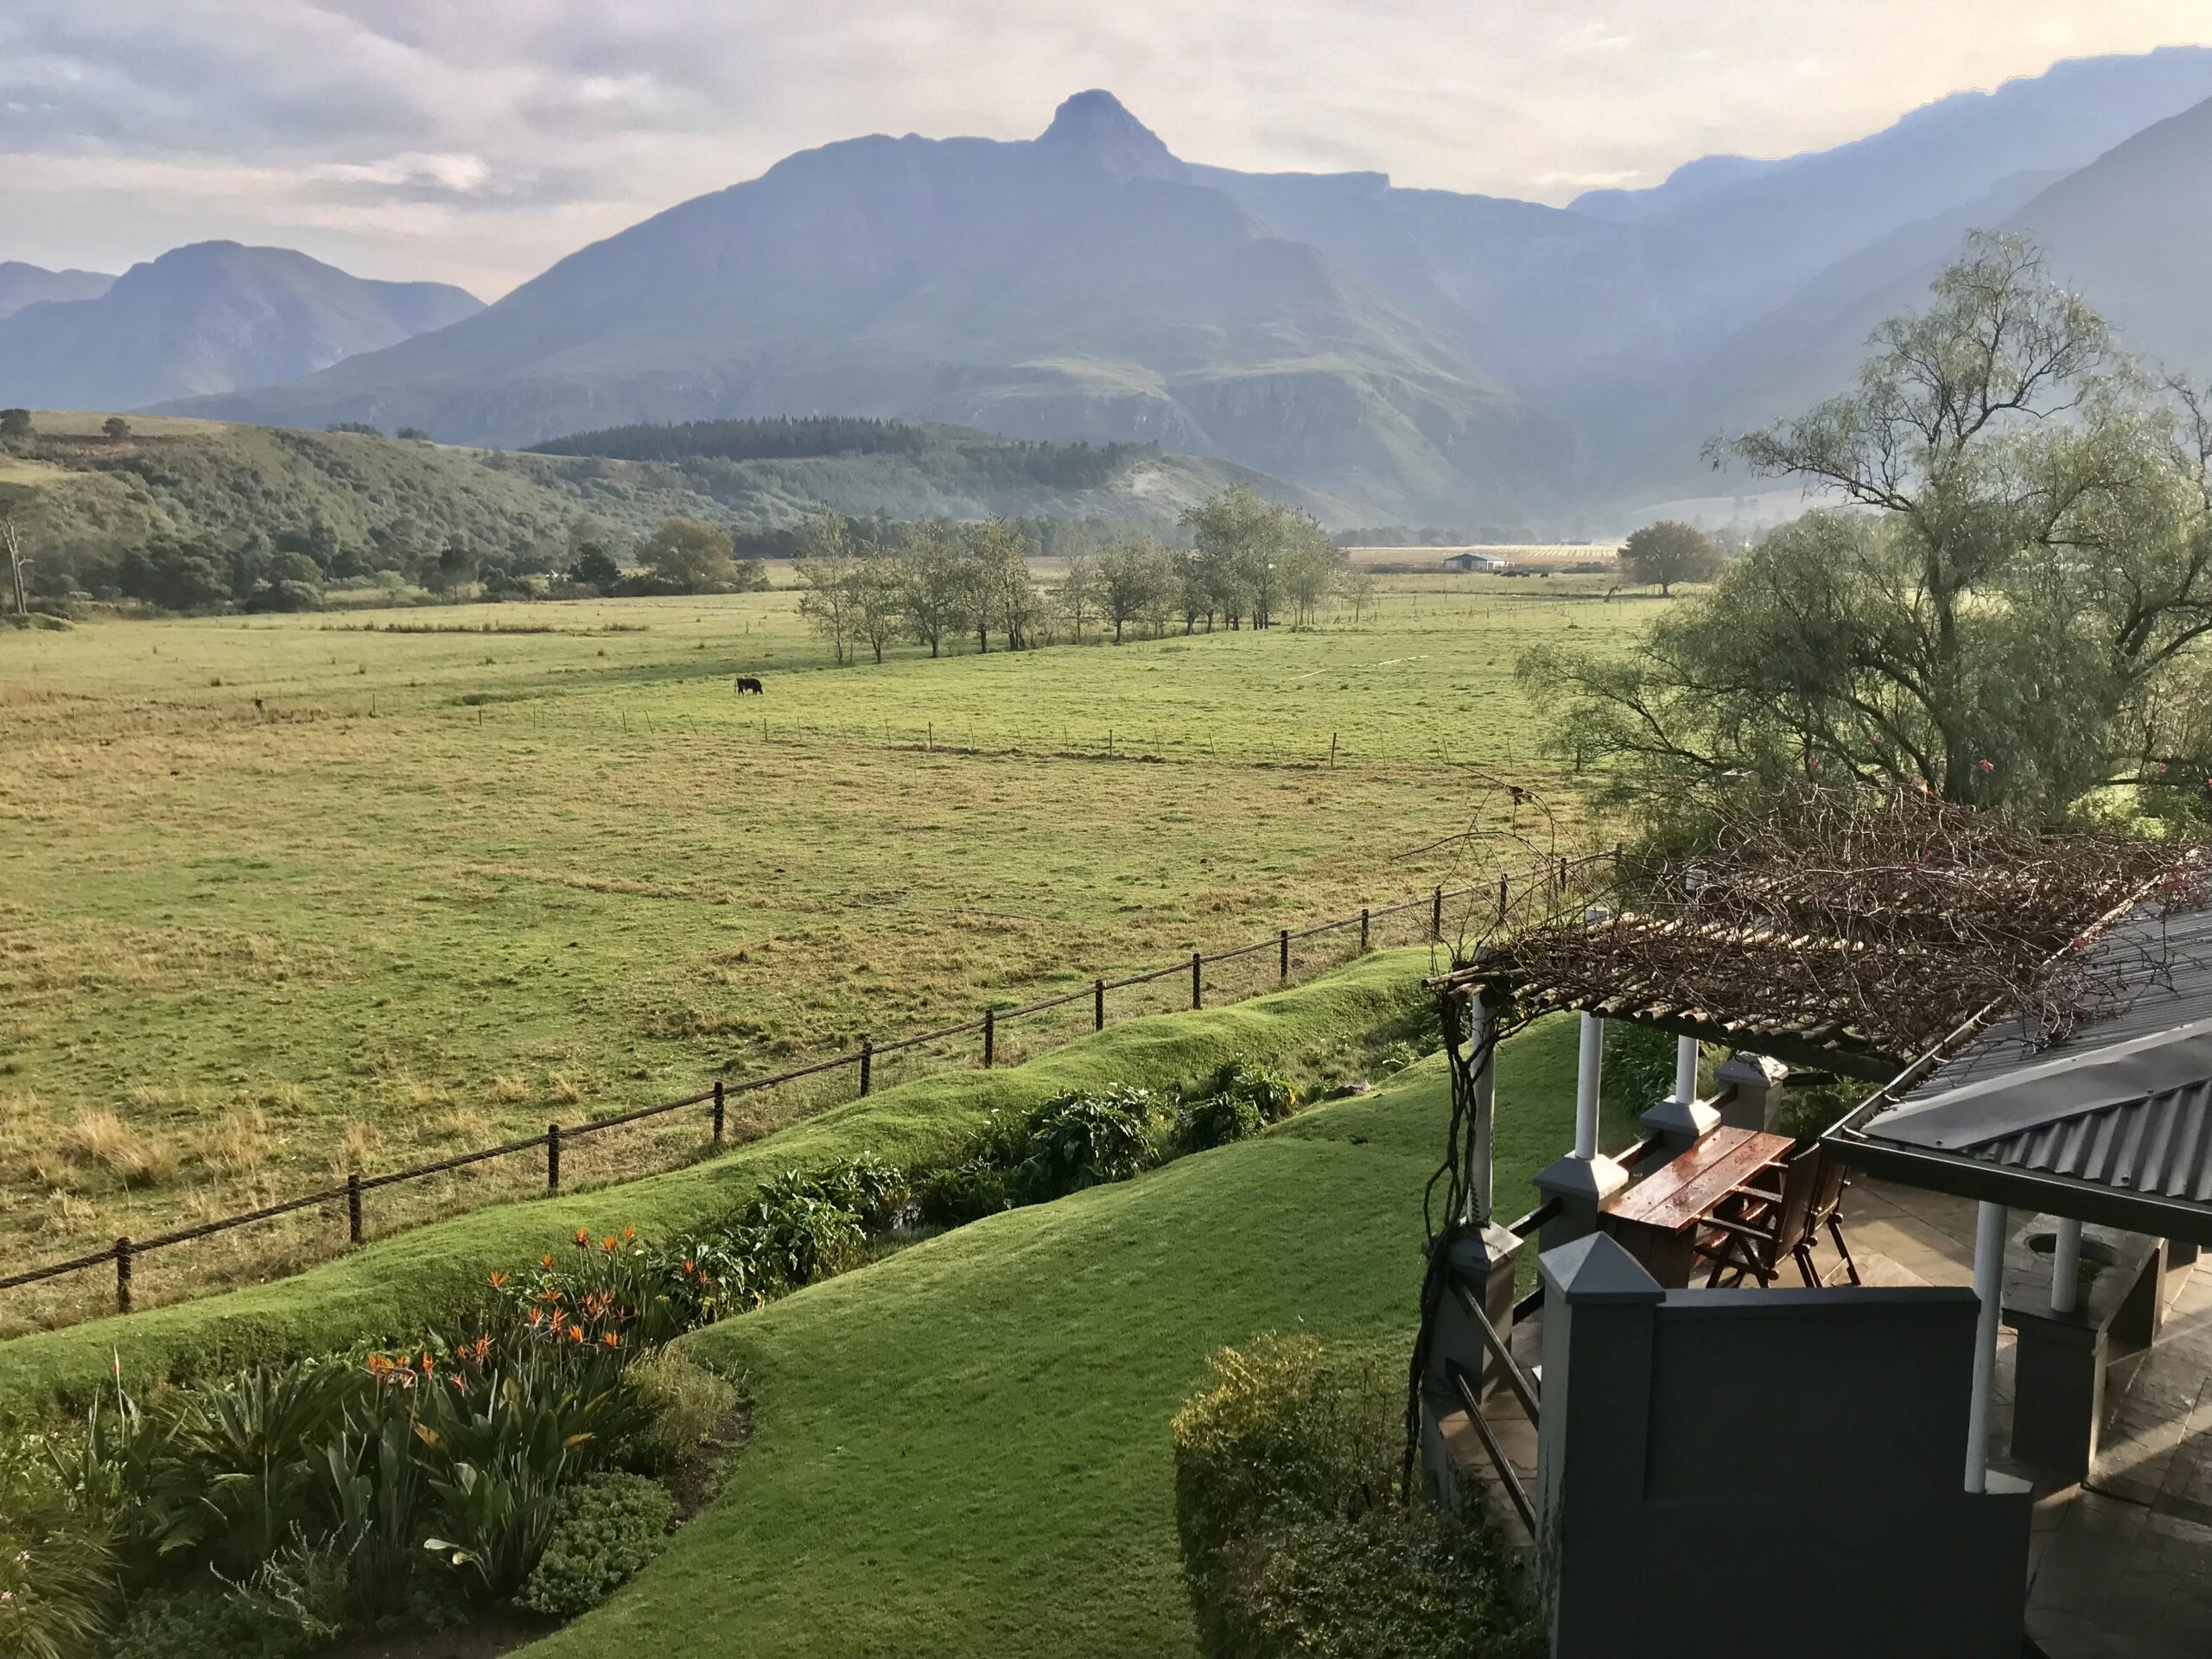 The ultimate guide to visiting Swellendam in South Africa with all the best restaurants, accommodations and activities.